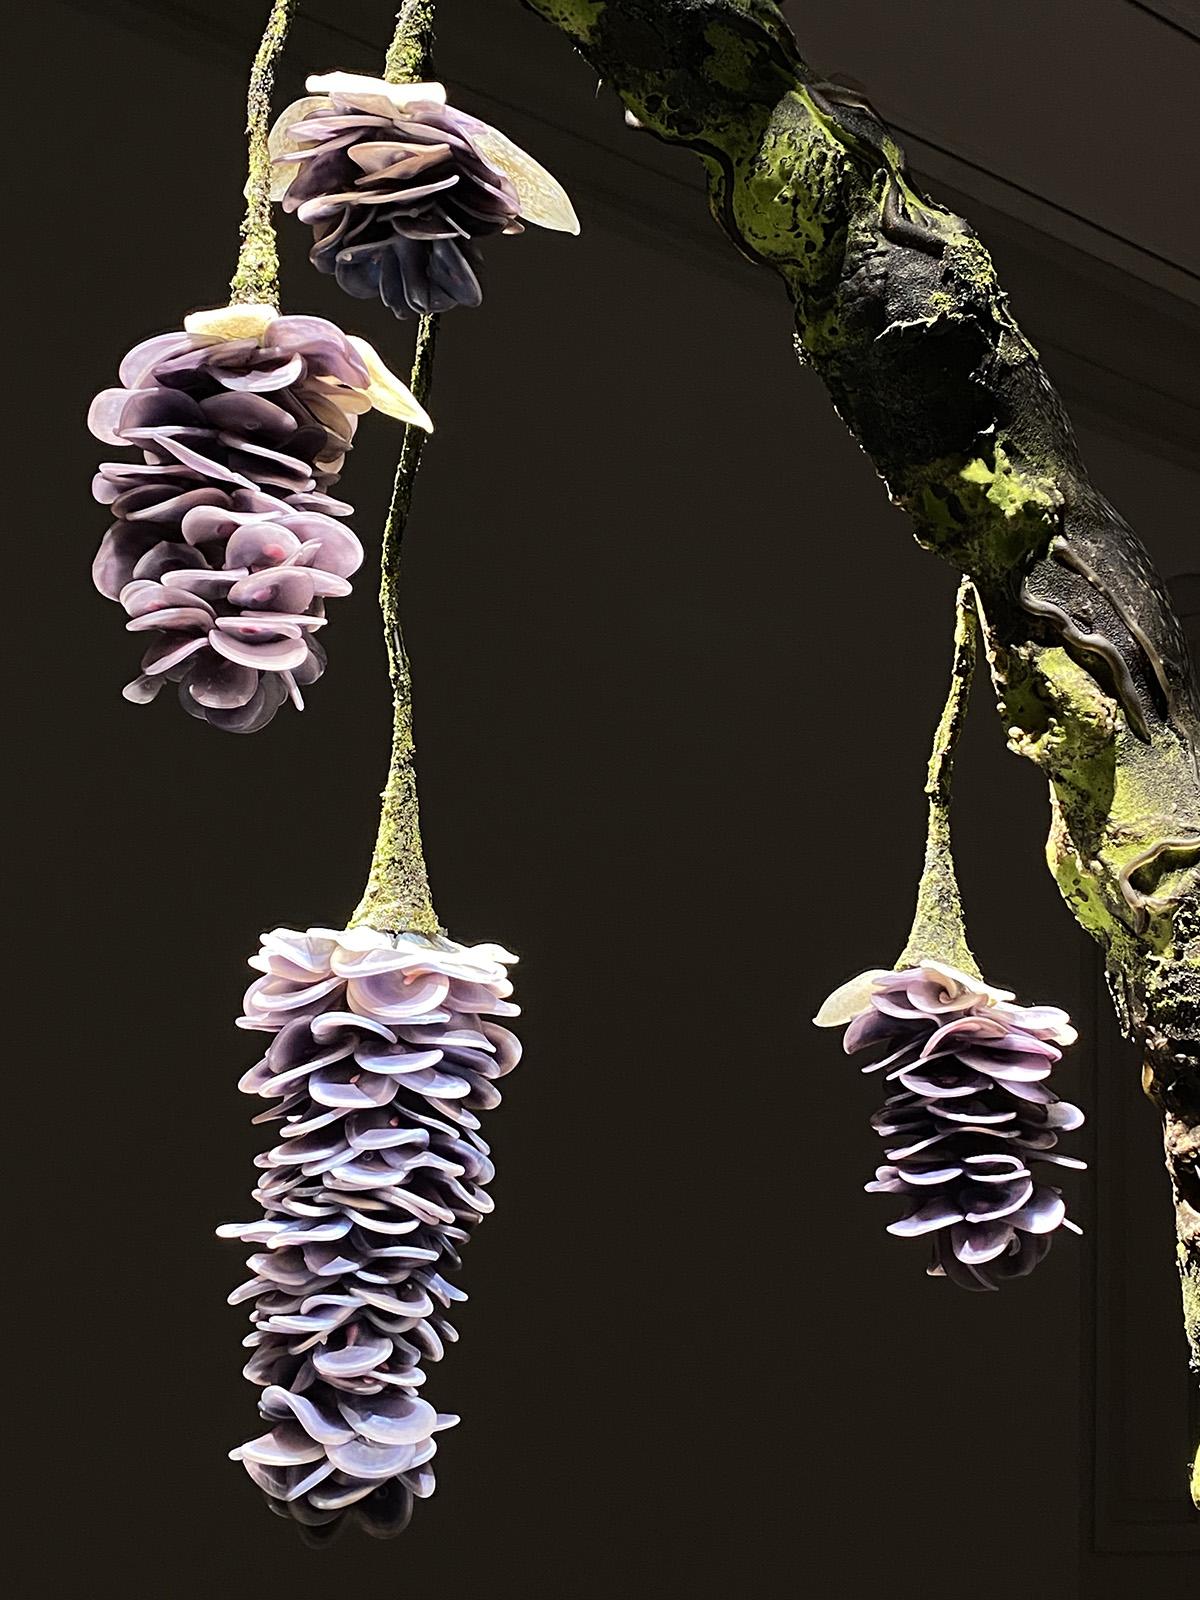 An installation photograph of flowers made of glass